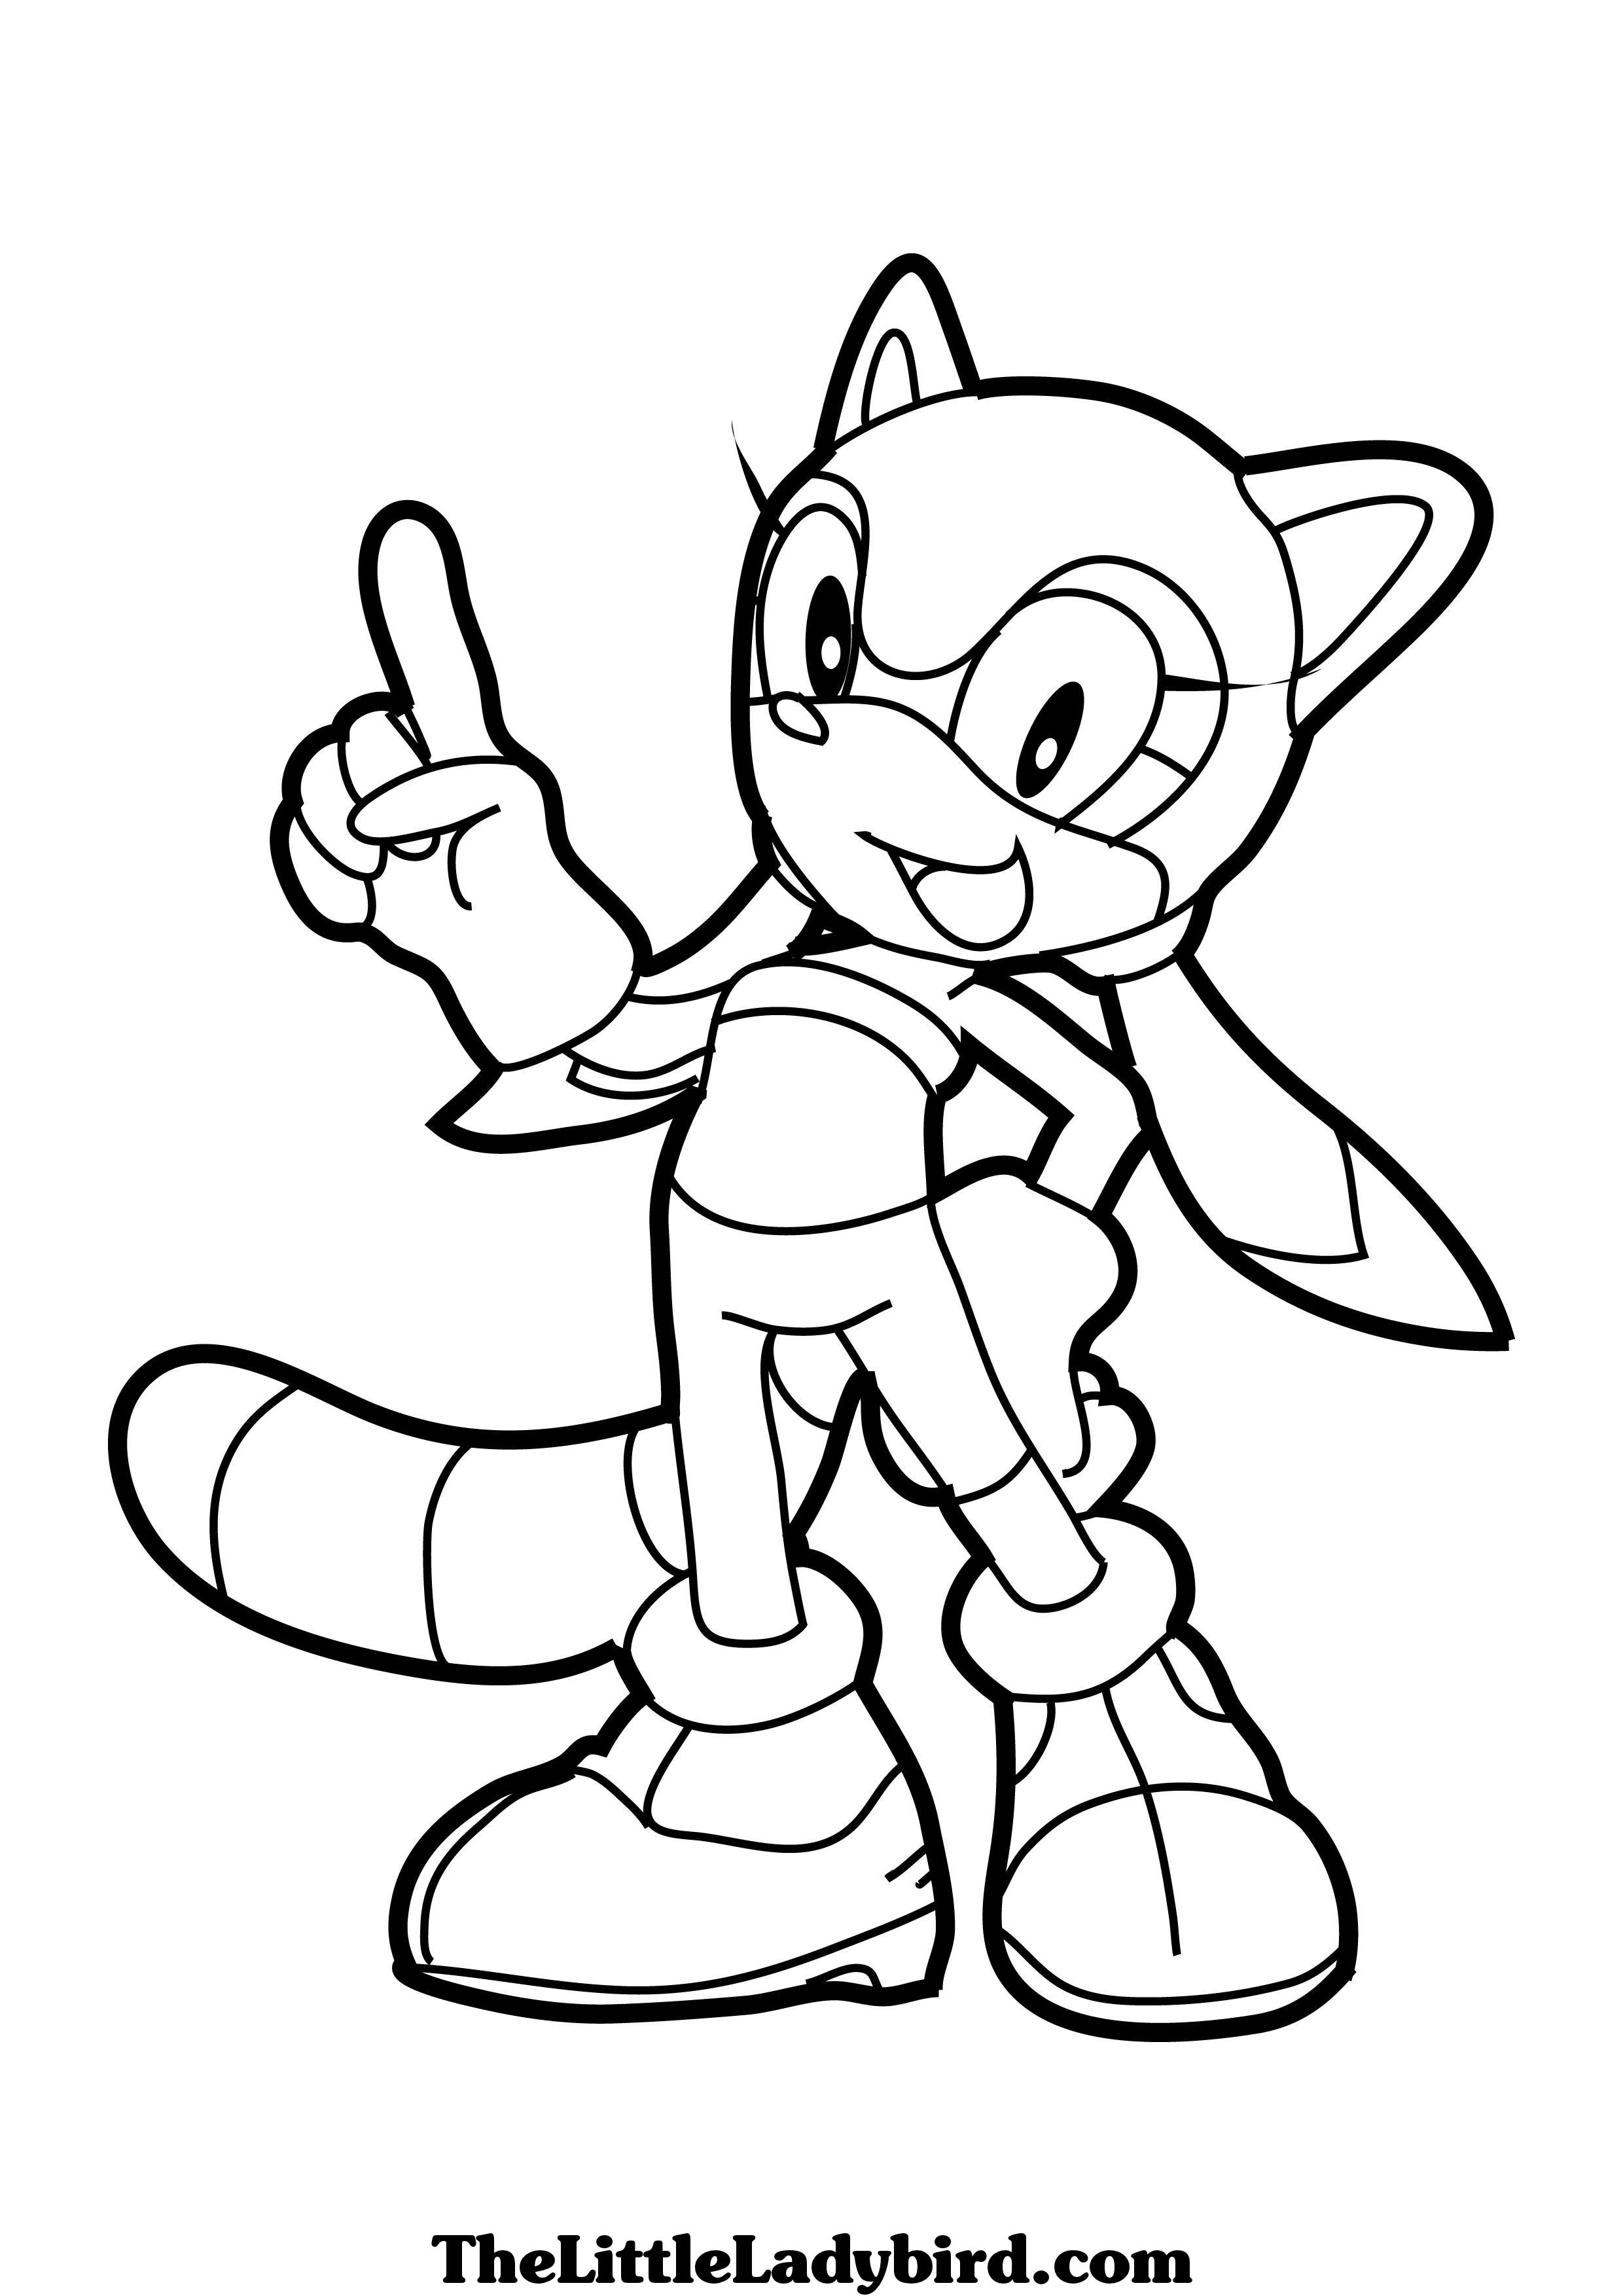  Sonic coloring pages | disney coloring pages for kids | color pages | coloring pages to print | kids coloring pages | #29